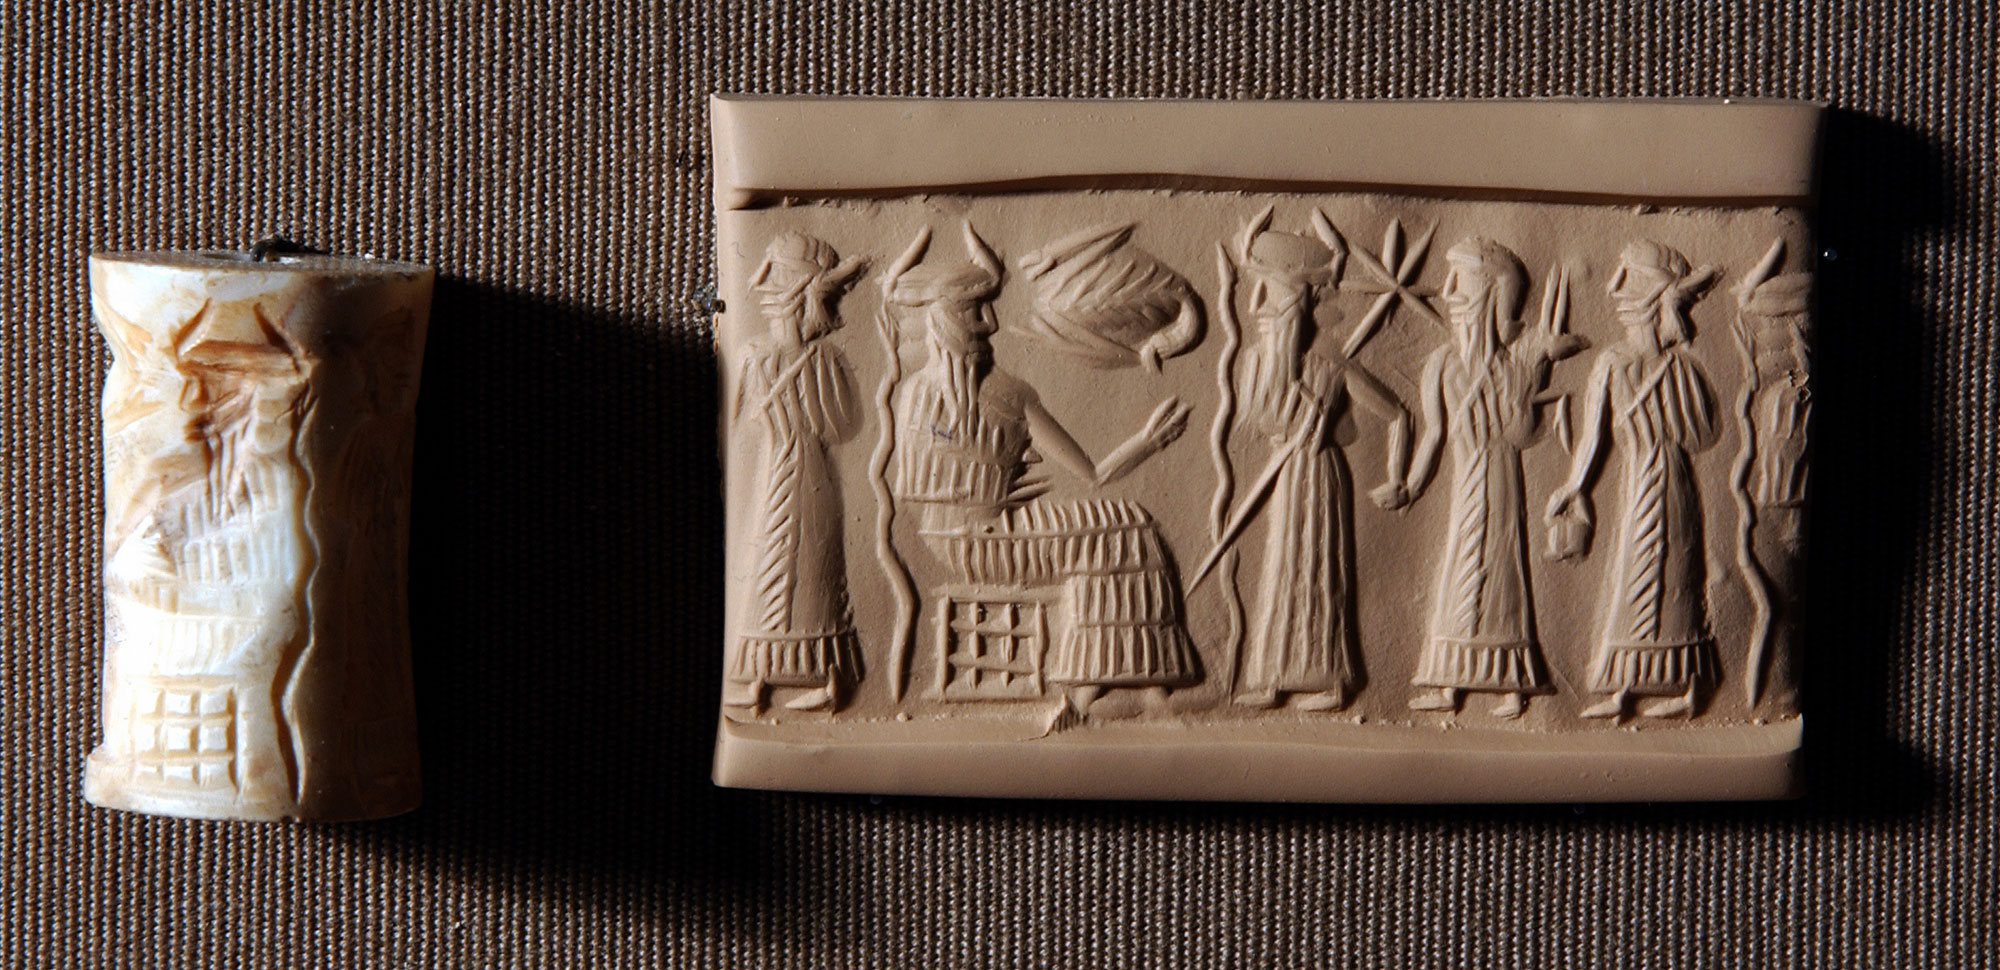 A white seal in the shape of a cylinder with sculpted indentations around its circumference and a block of clay on which it was used sit on a surface. The image on the block of clay demonstrates how the cylinder seal works. The image appears to be of several people standing in front of one figure sitting on a throne.